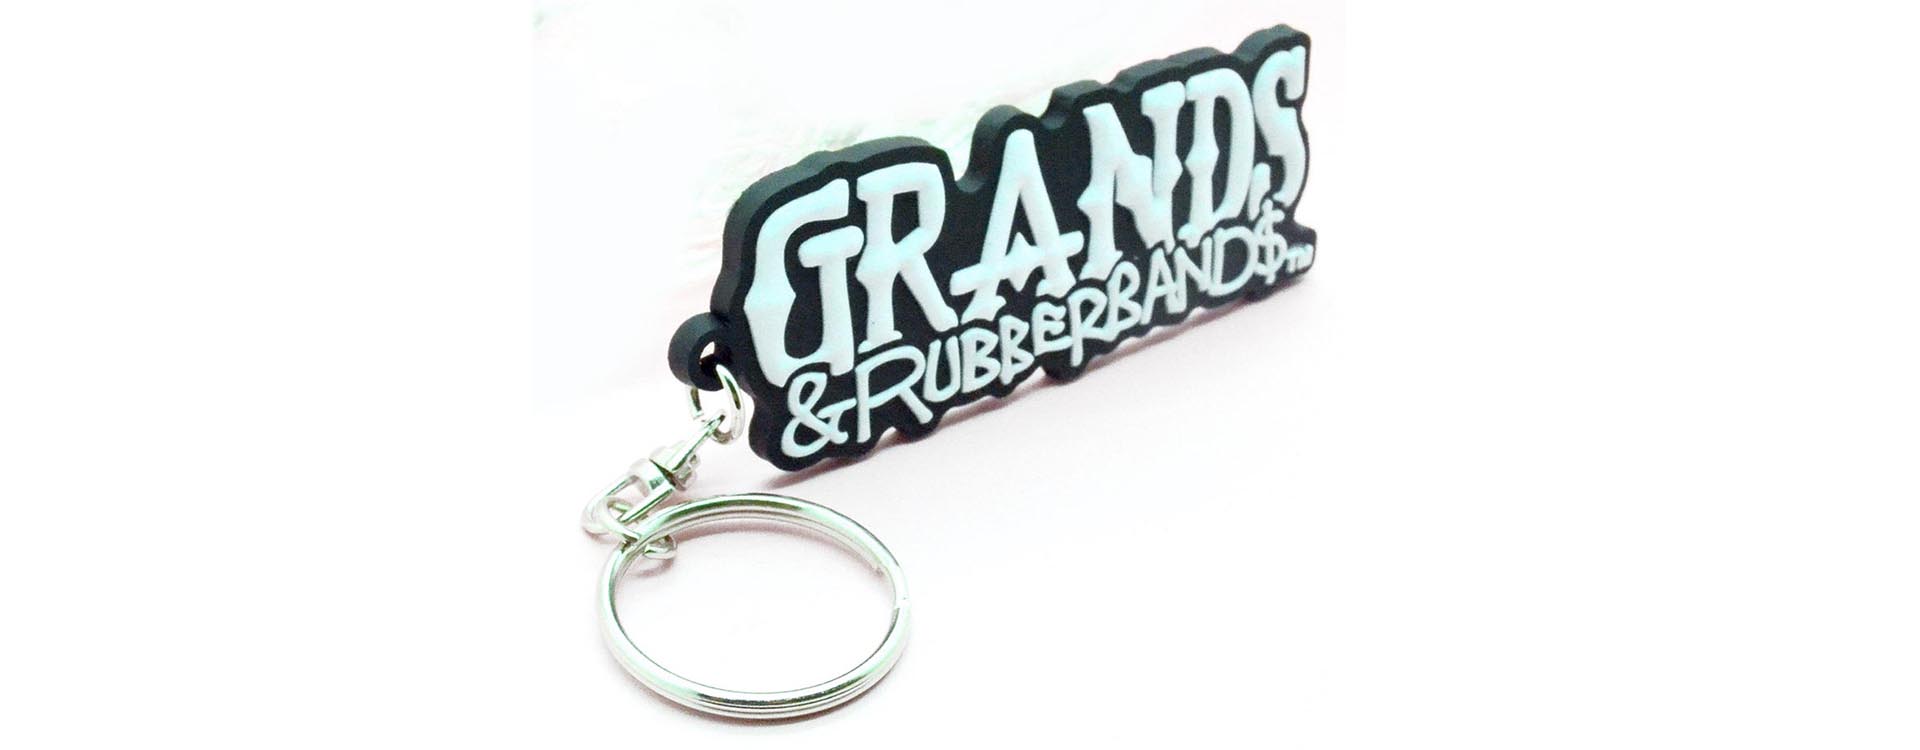 ArtiGifts - Custom PVC Keychains: Showcasing Your Style with Vibrant Personalized Accessories